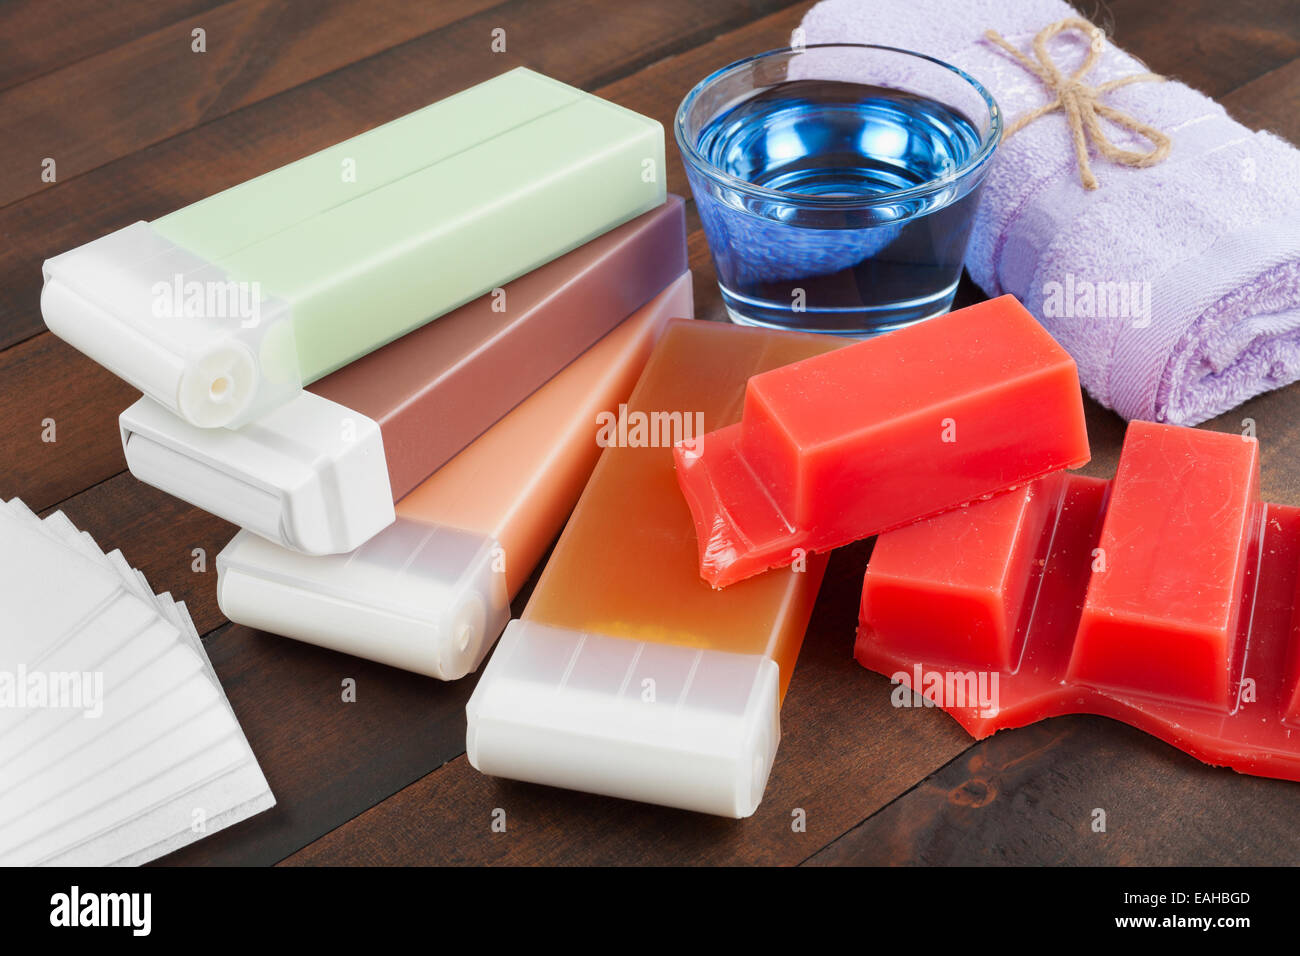 wax for hair removal, towel and oil Stock Photo